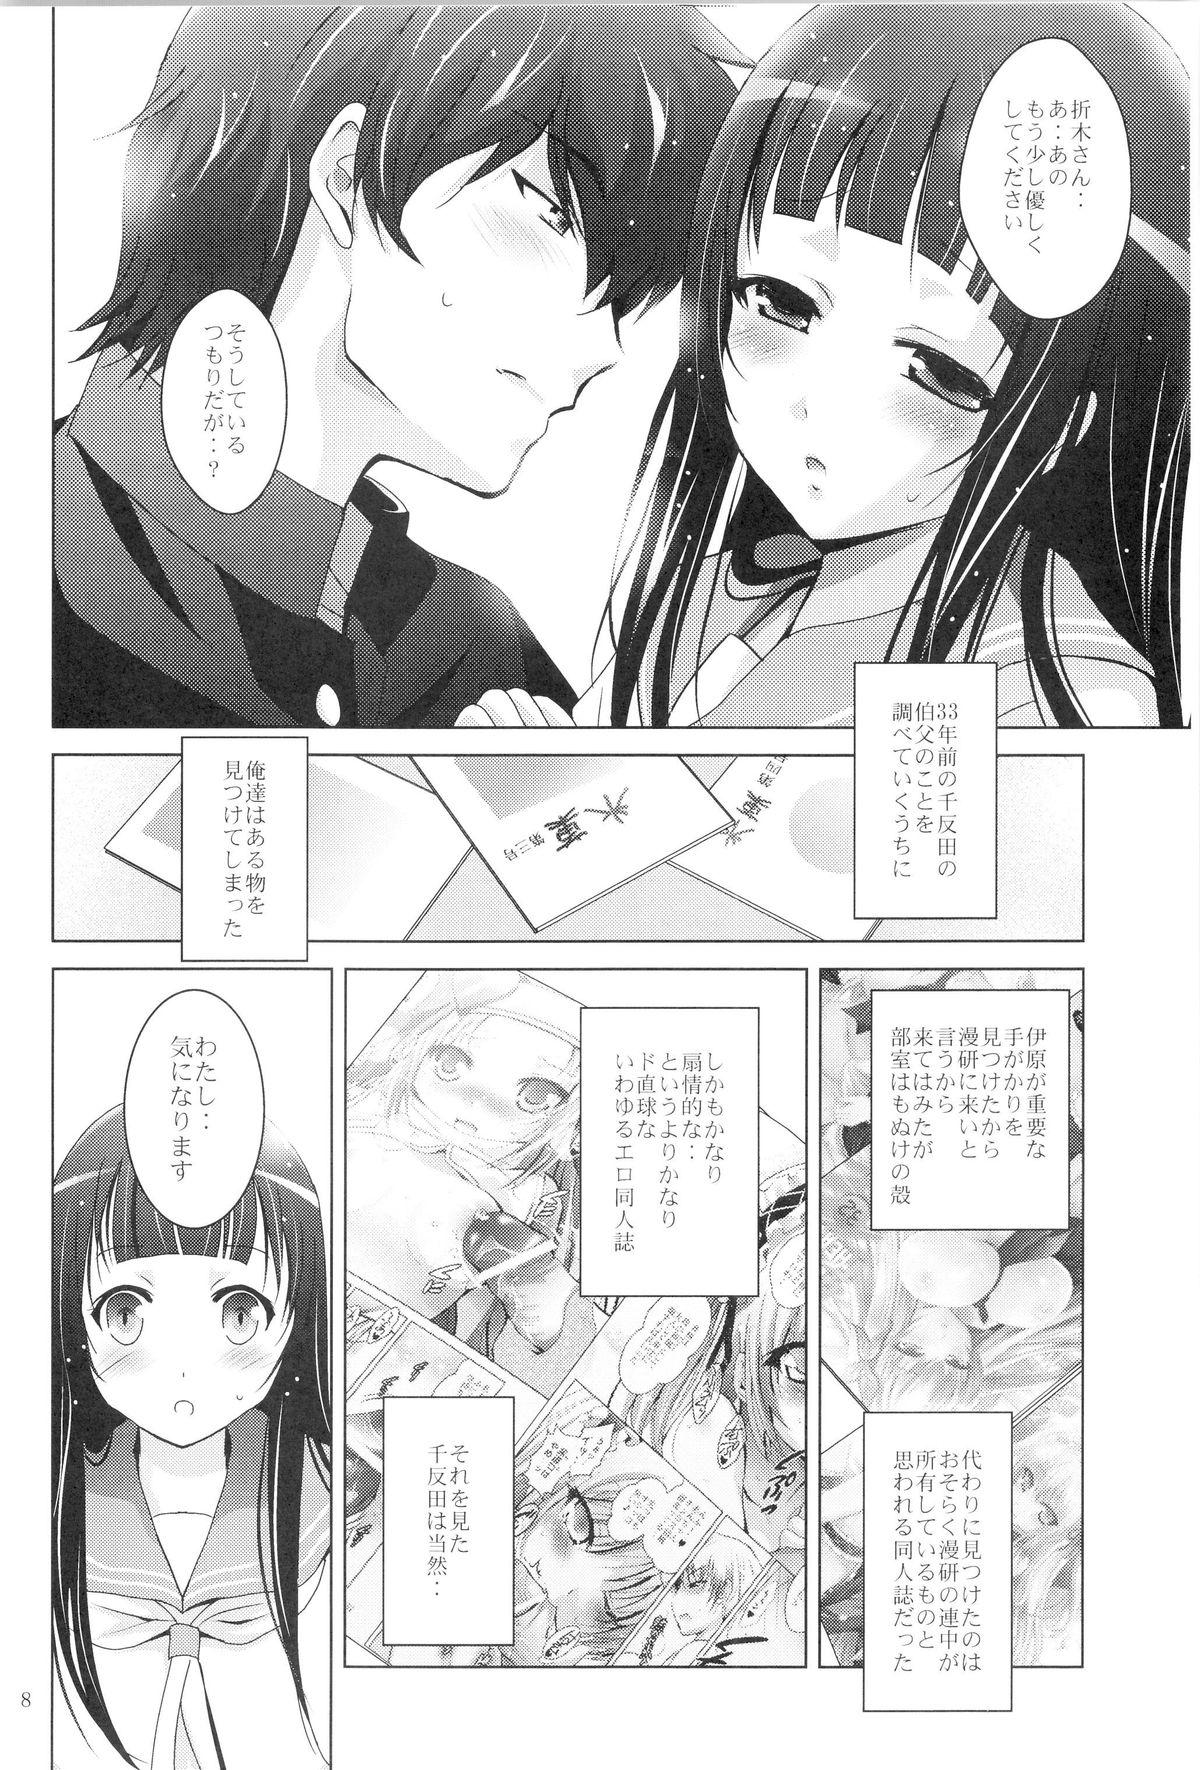 Perfect Tits Mousou Theater 33 - Hyouka Casting - Page 7